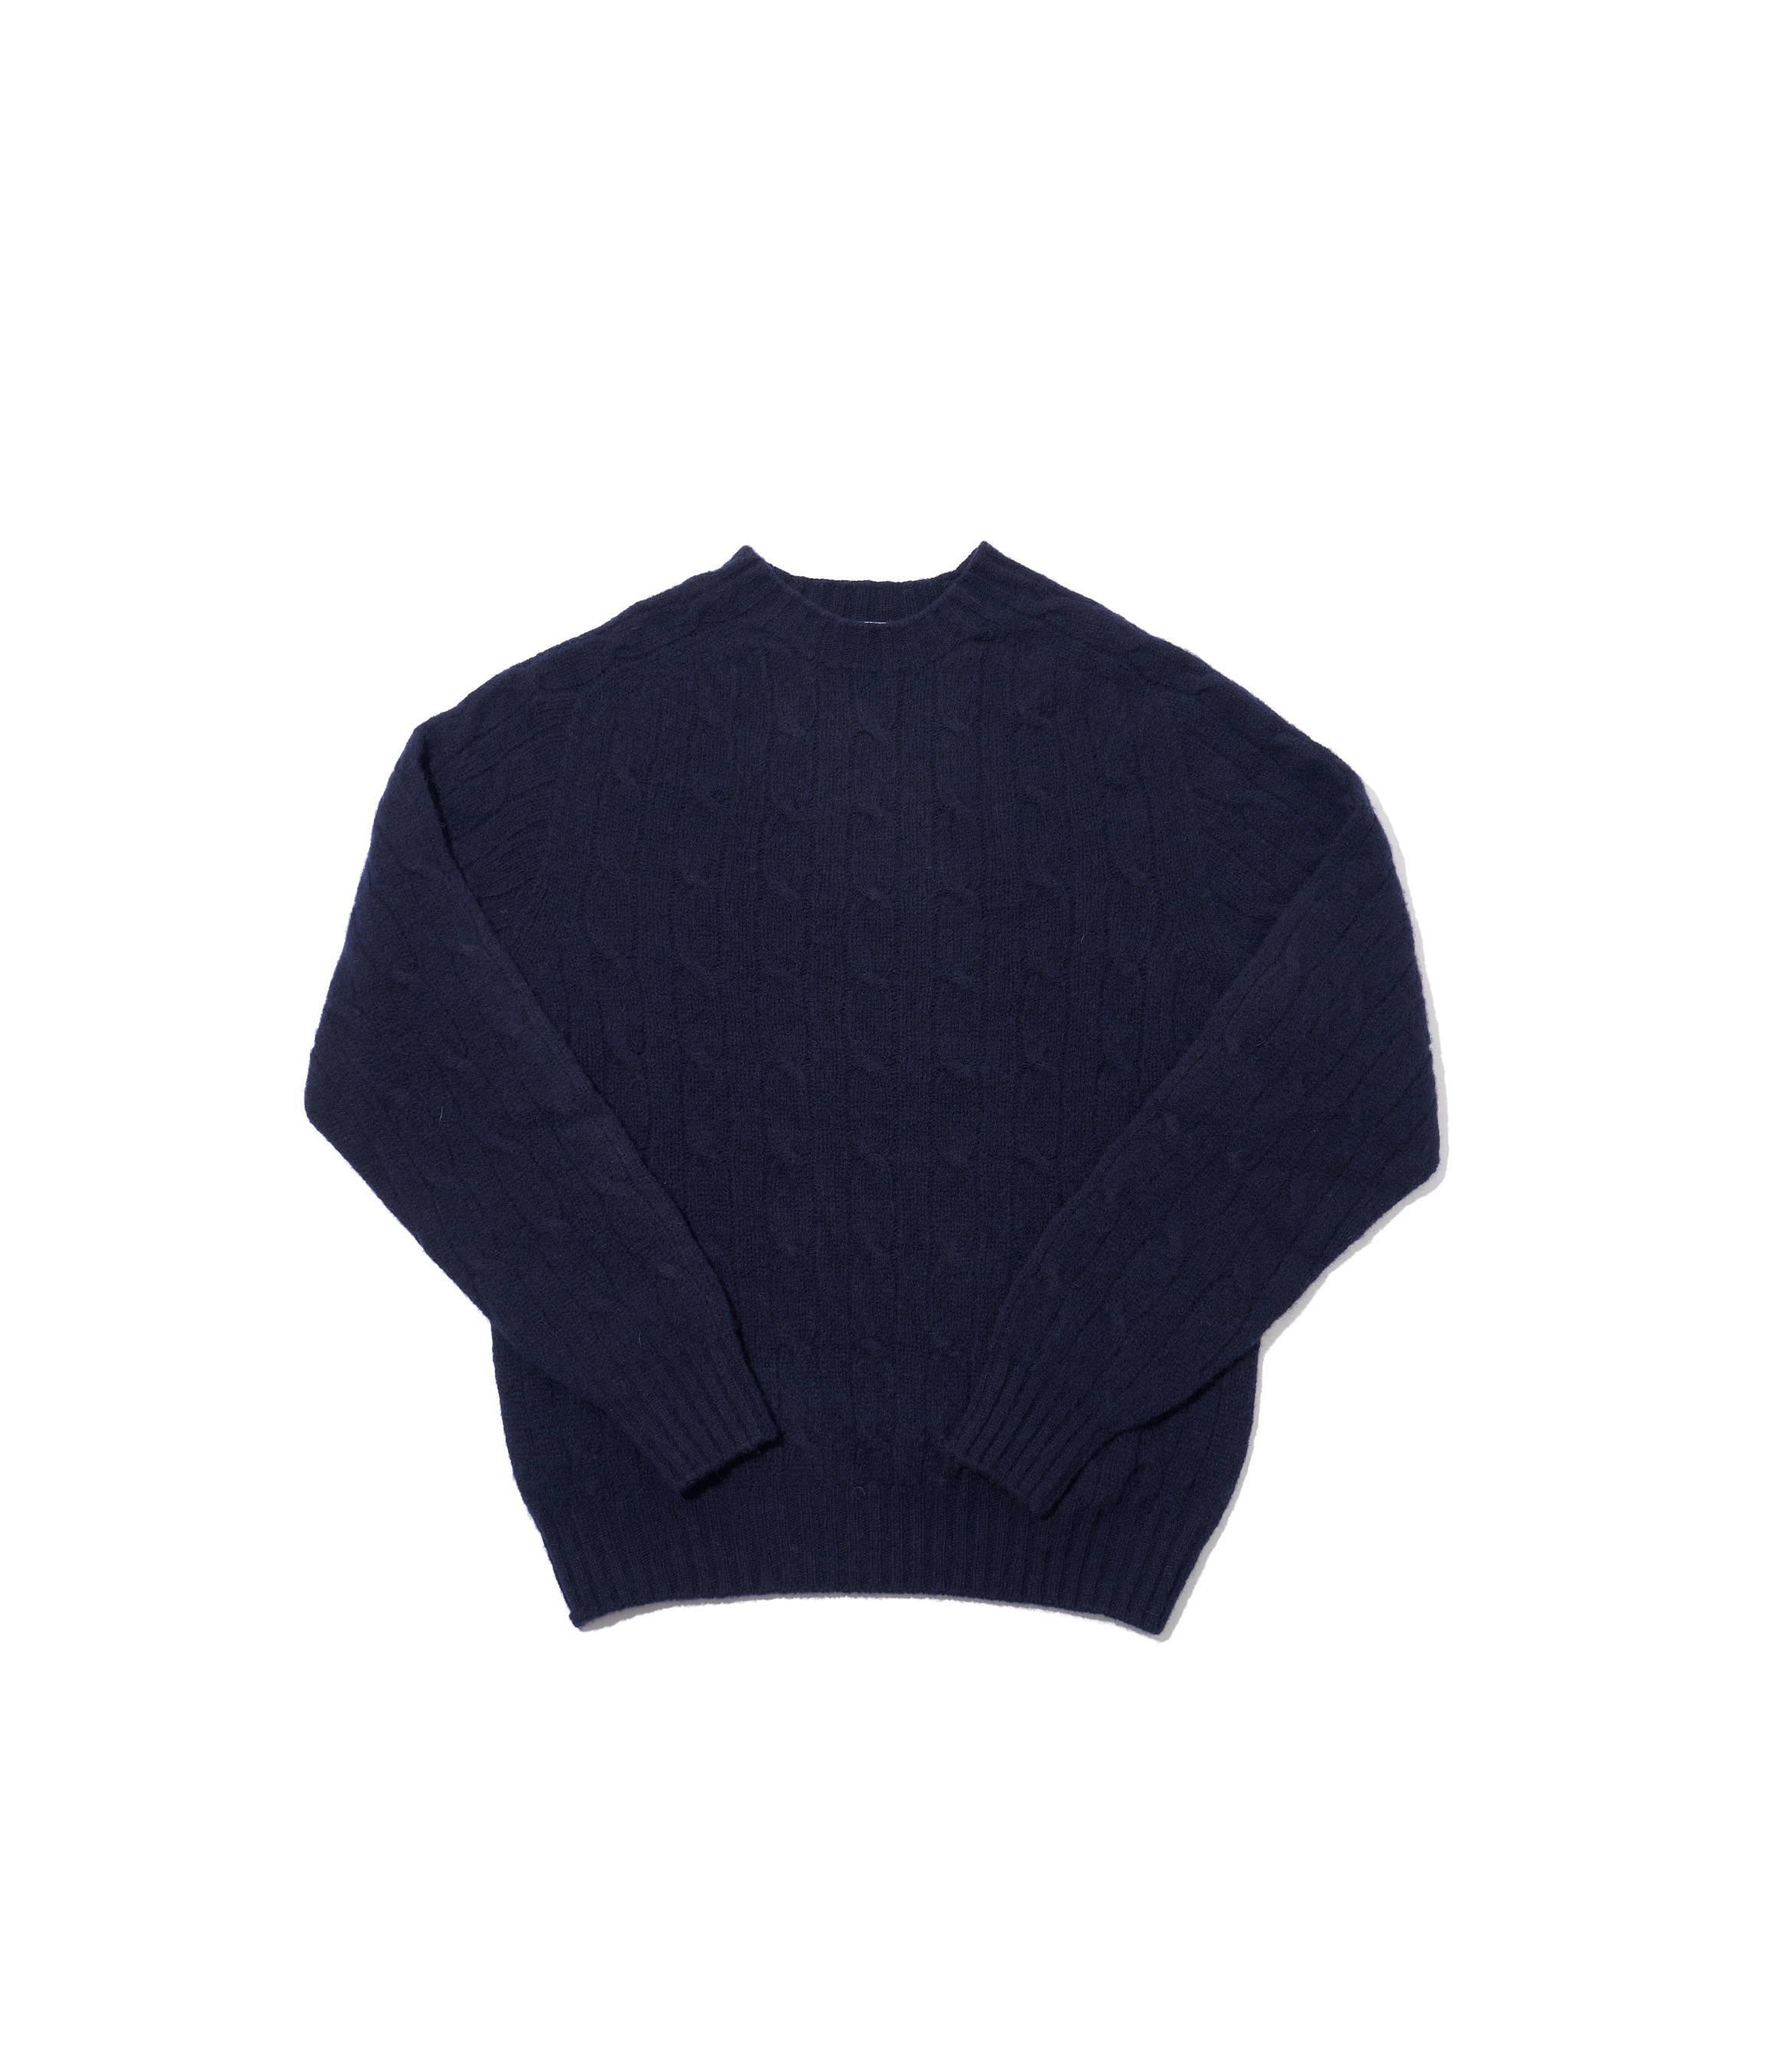 Finlay Cable Crew Neck Swift